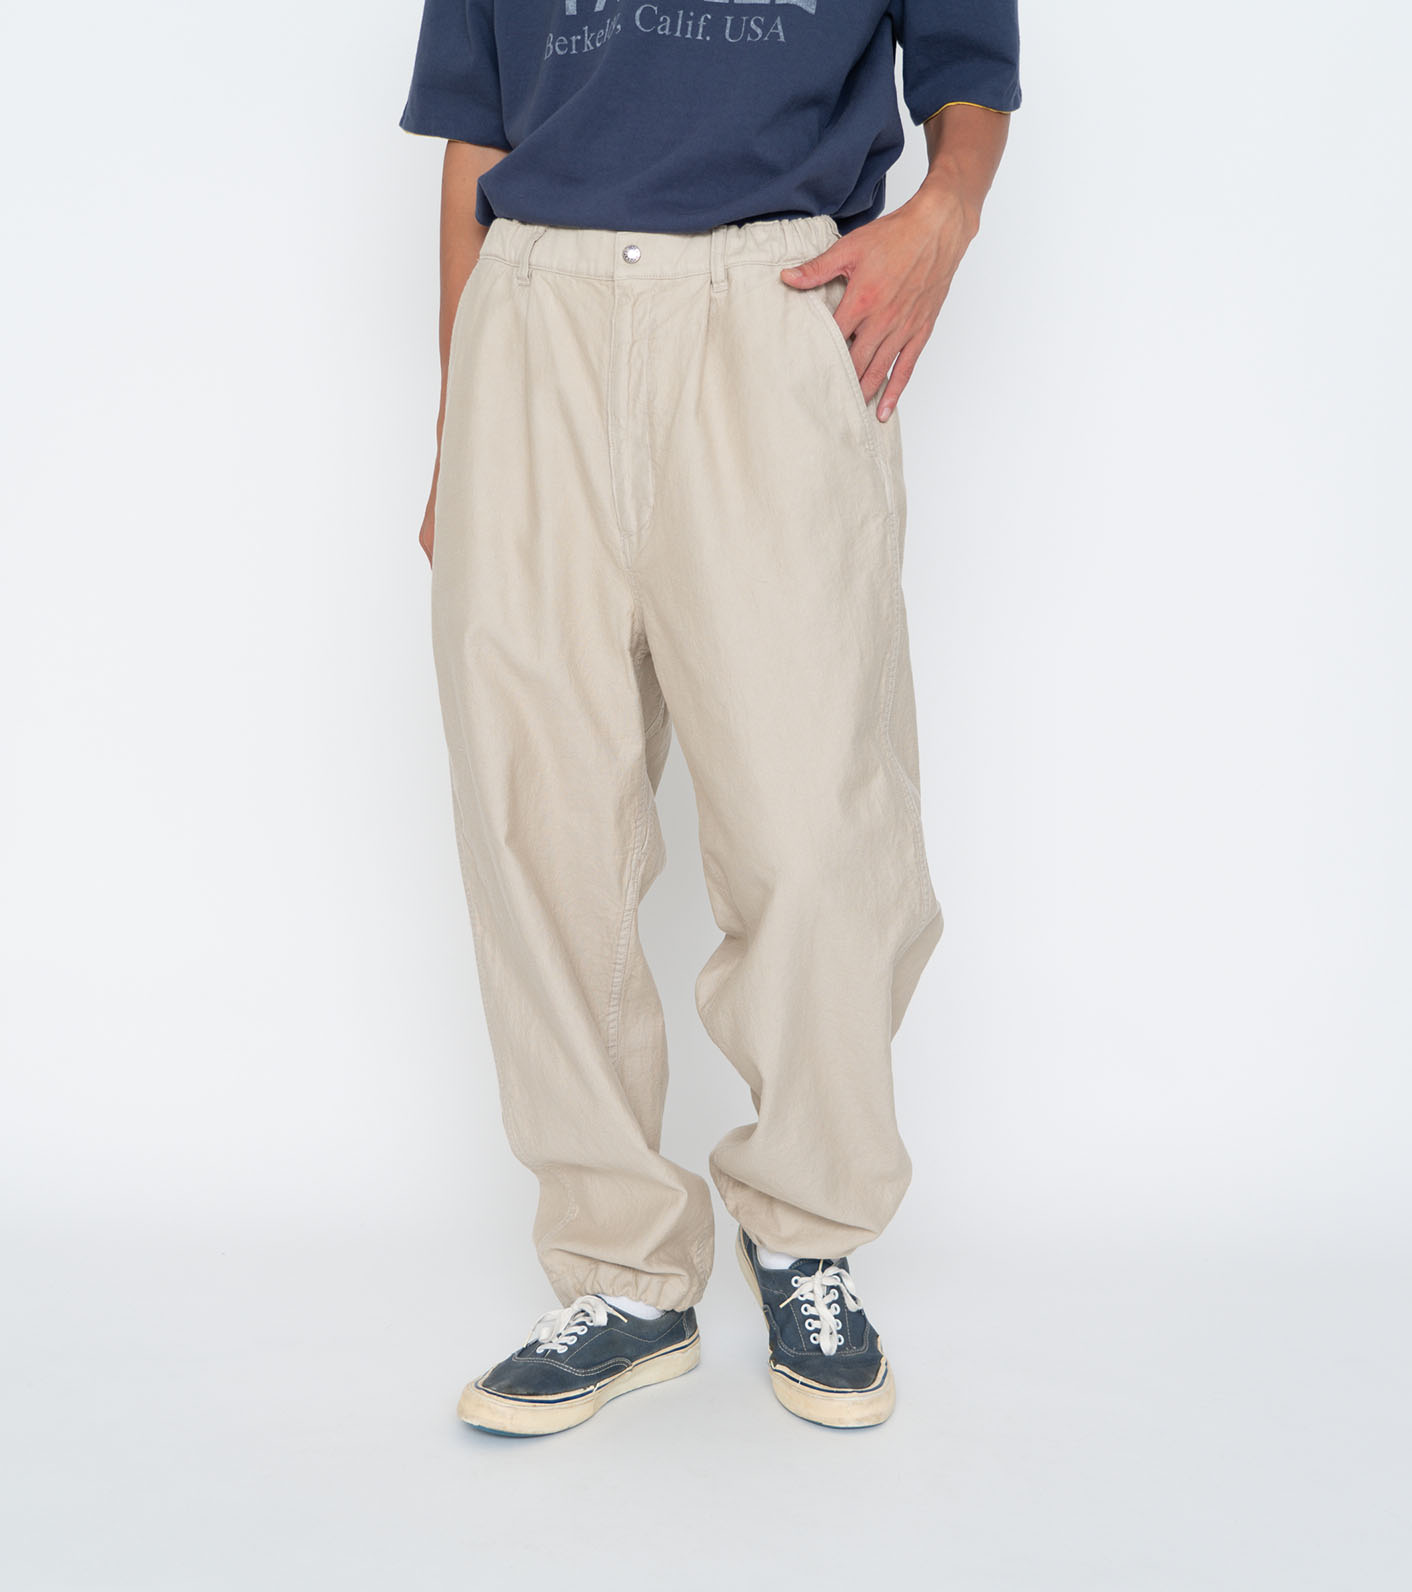 nanamica / Uncut Corduroy Wide Tapered Field Pants